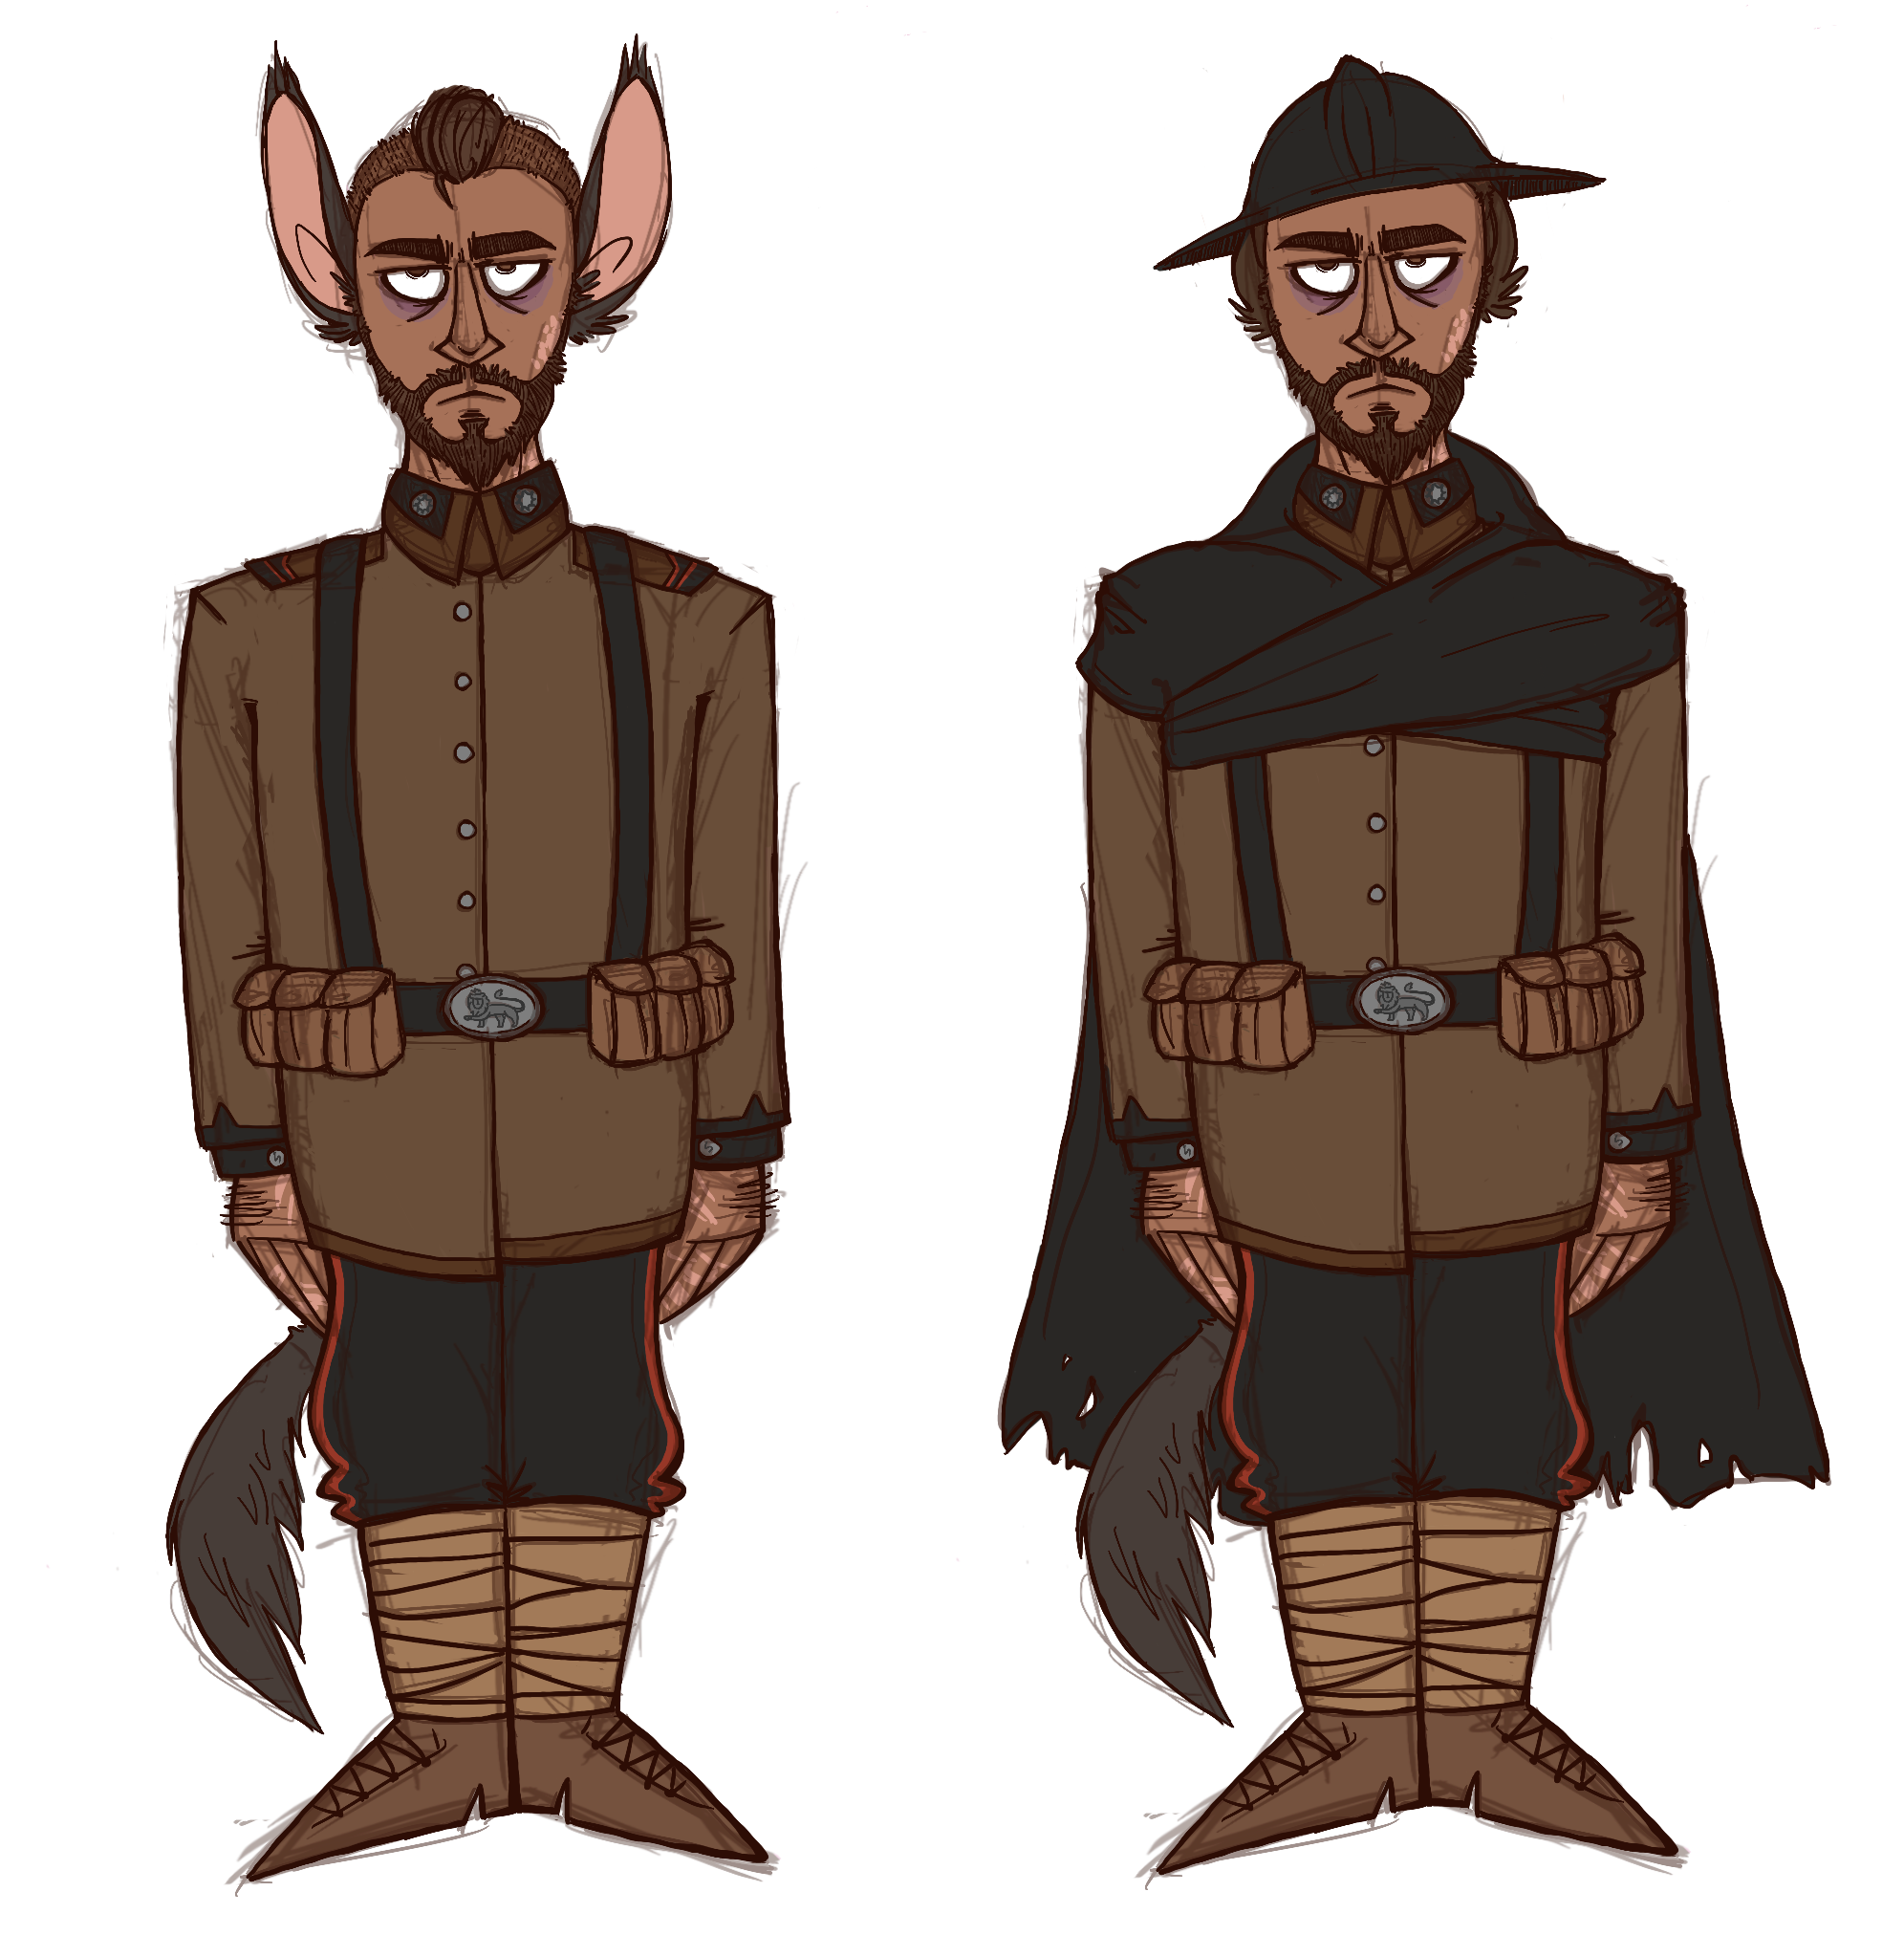 Uniform reference. He has to strap those ears down to fit under the helmet.<br> It's as uncomfortable as you'd expect.